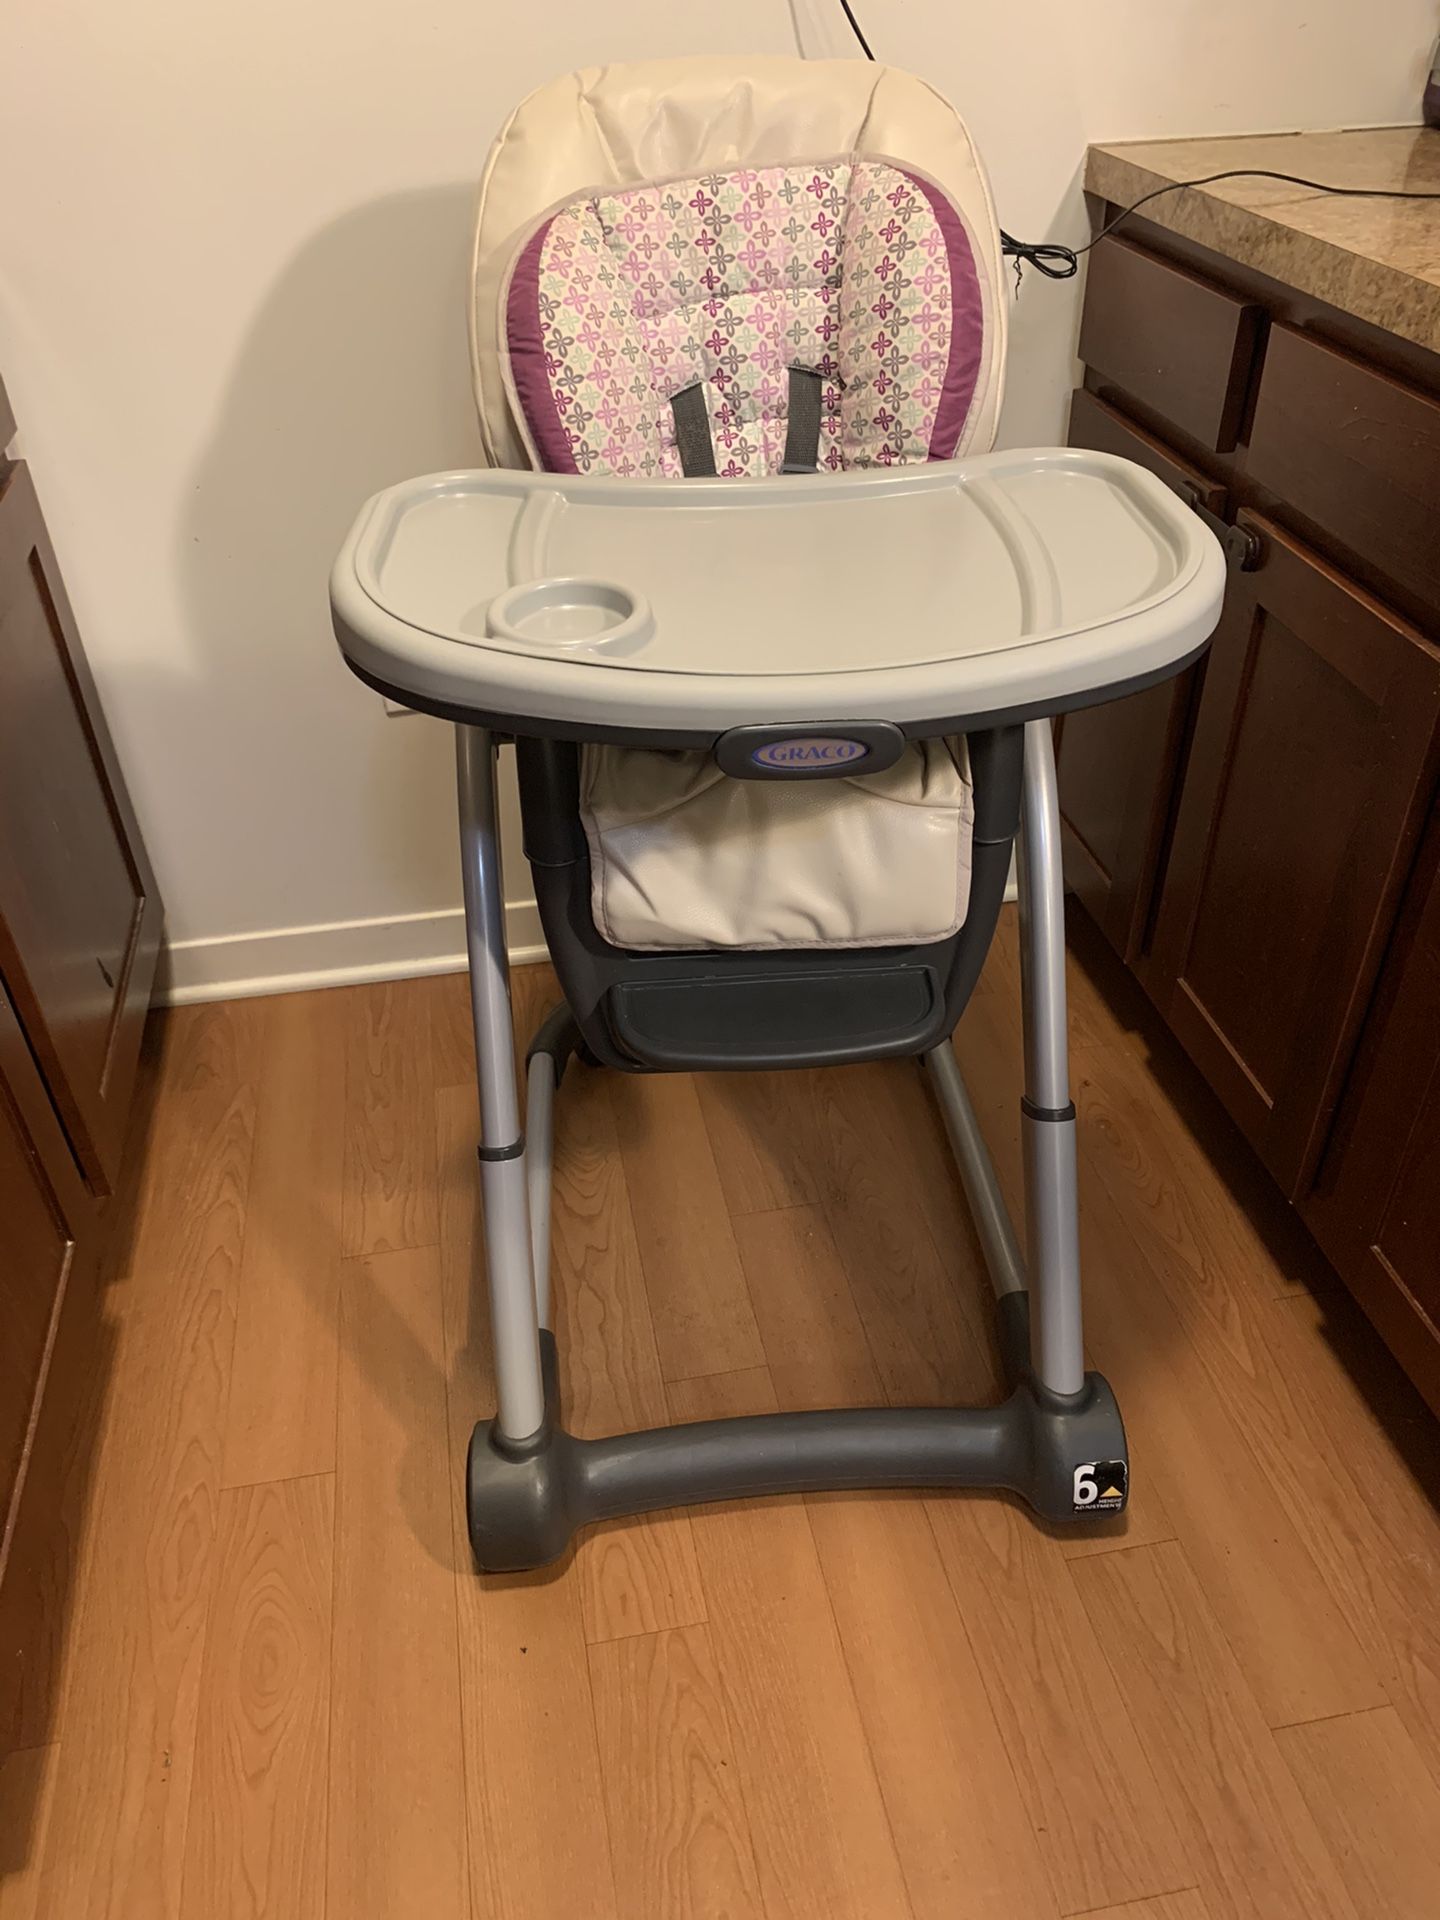 Graco Blossom 6-in-1 Seating System Convertible High Chair